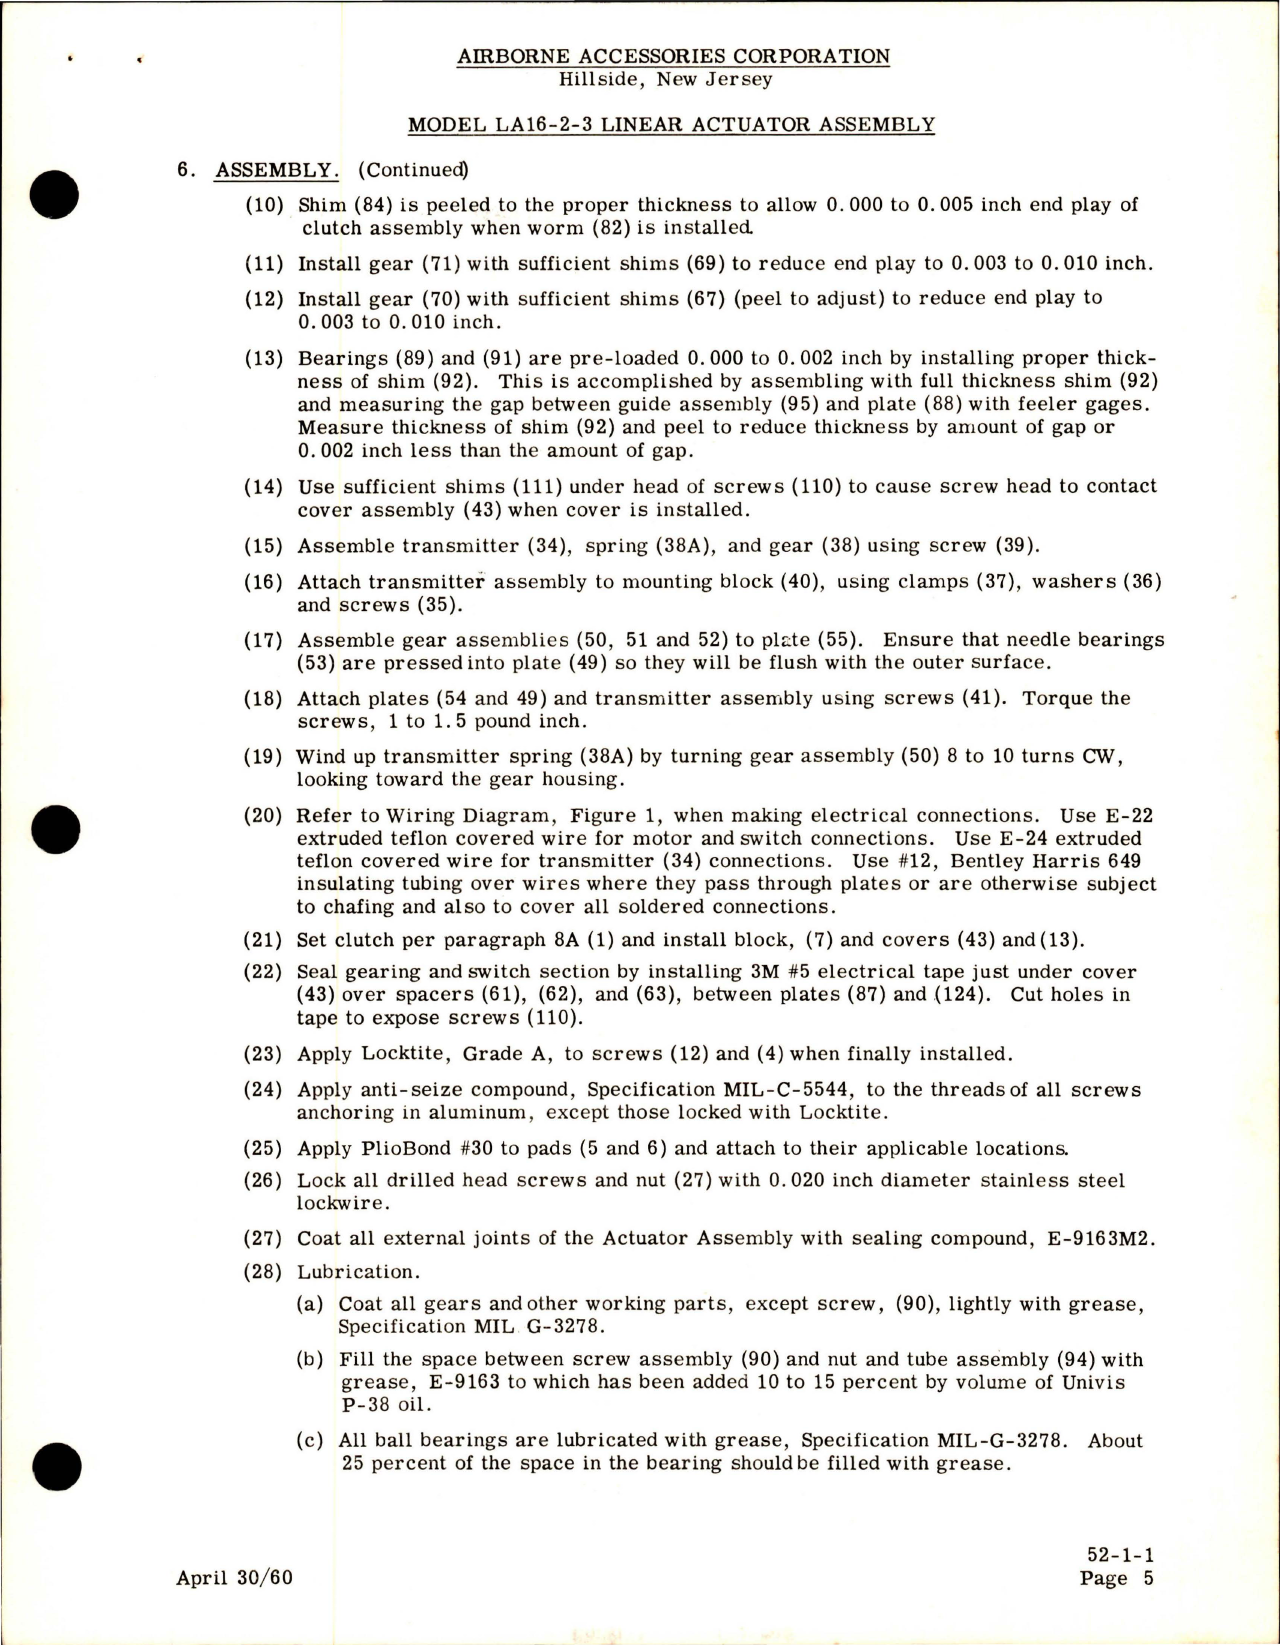 Sample page 5 from AirCorps Library document: Overhaul Instructions for Linear Actuator Assembly - Model LA16-2-3 